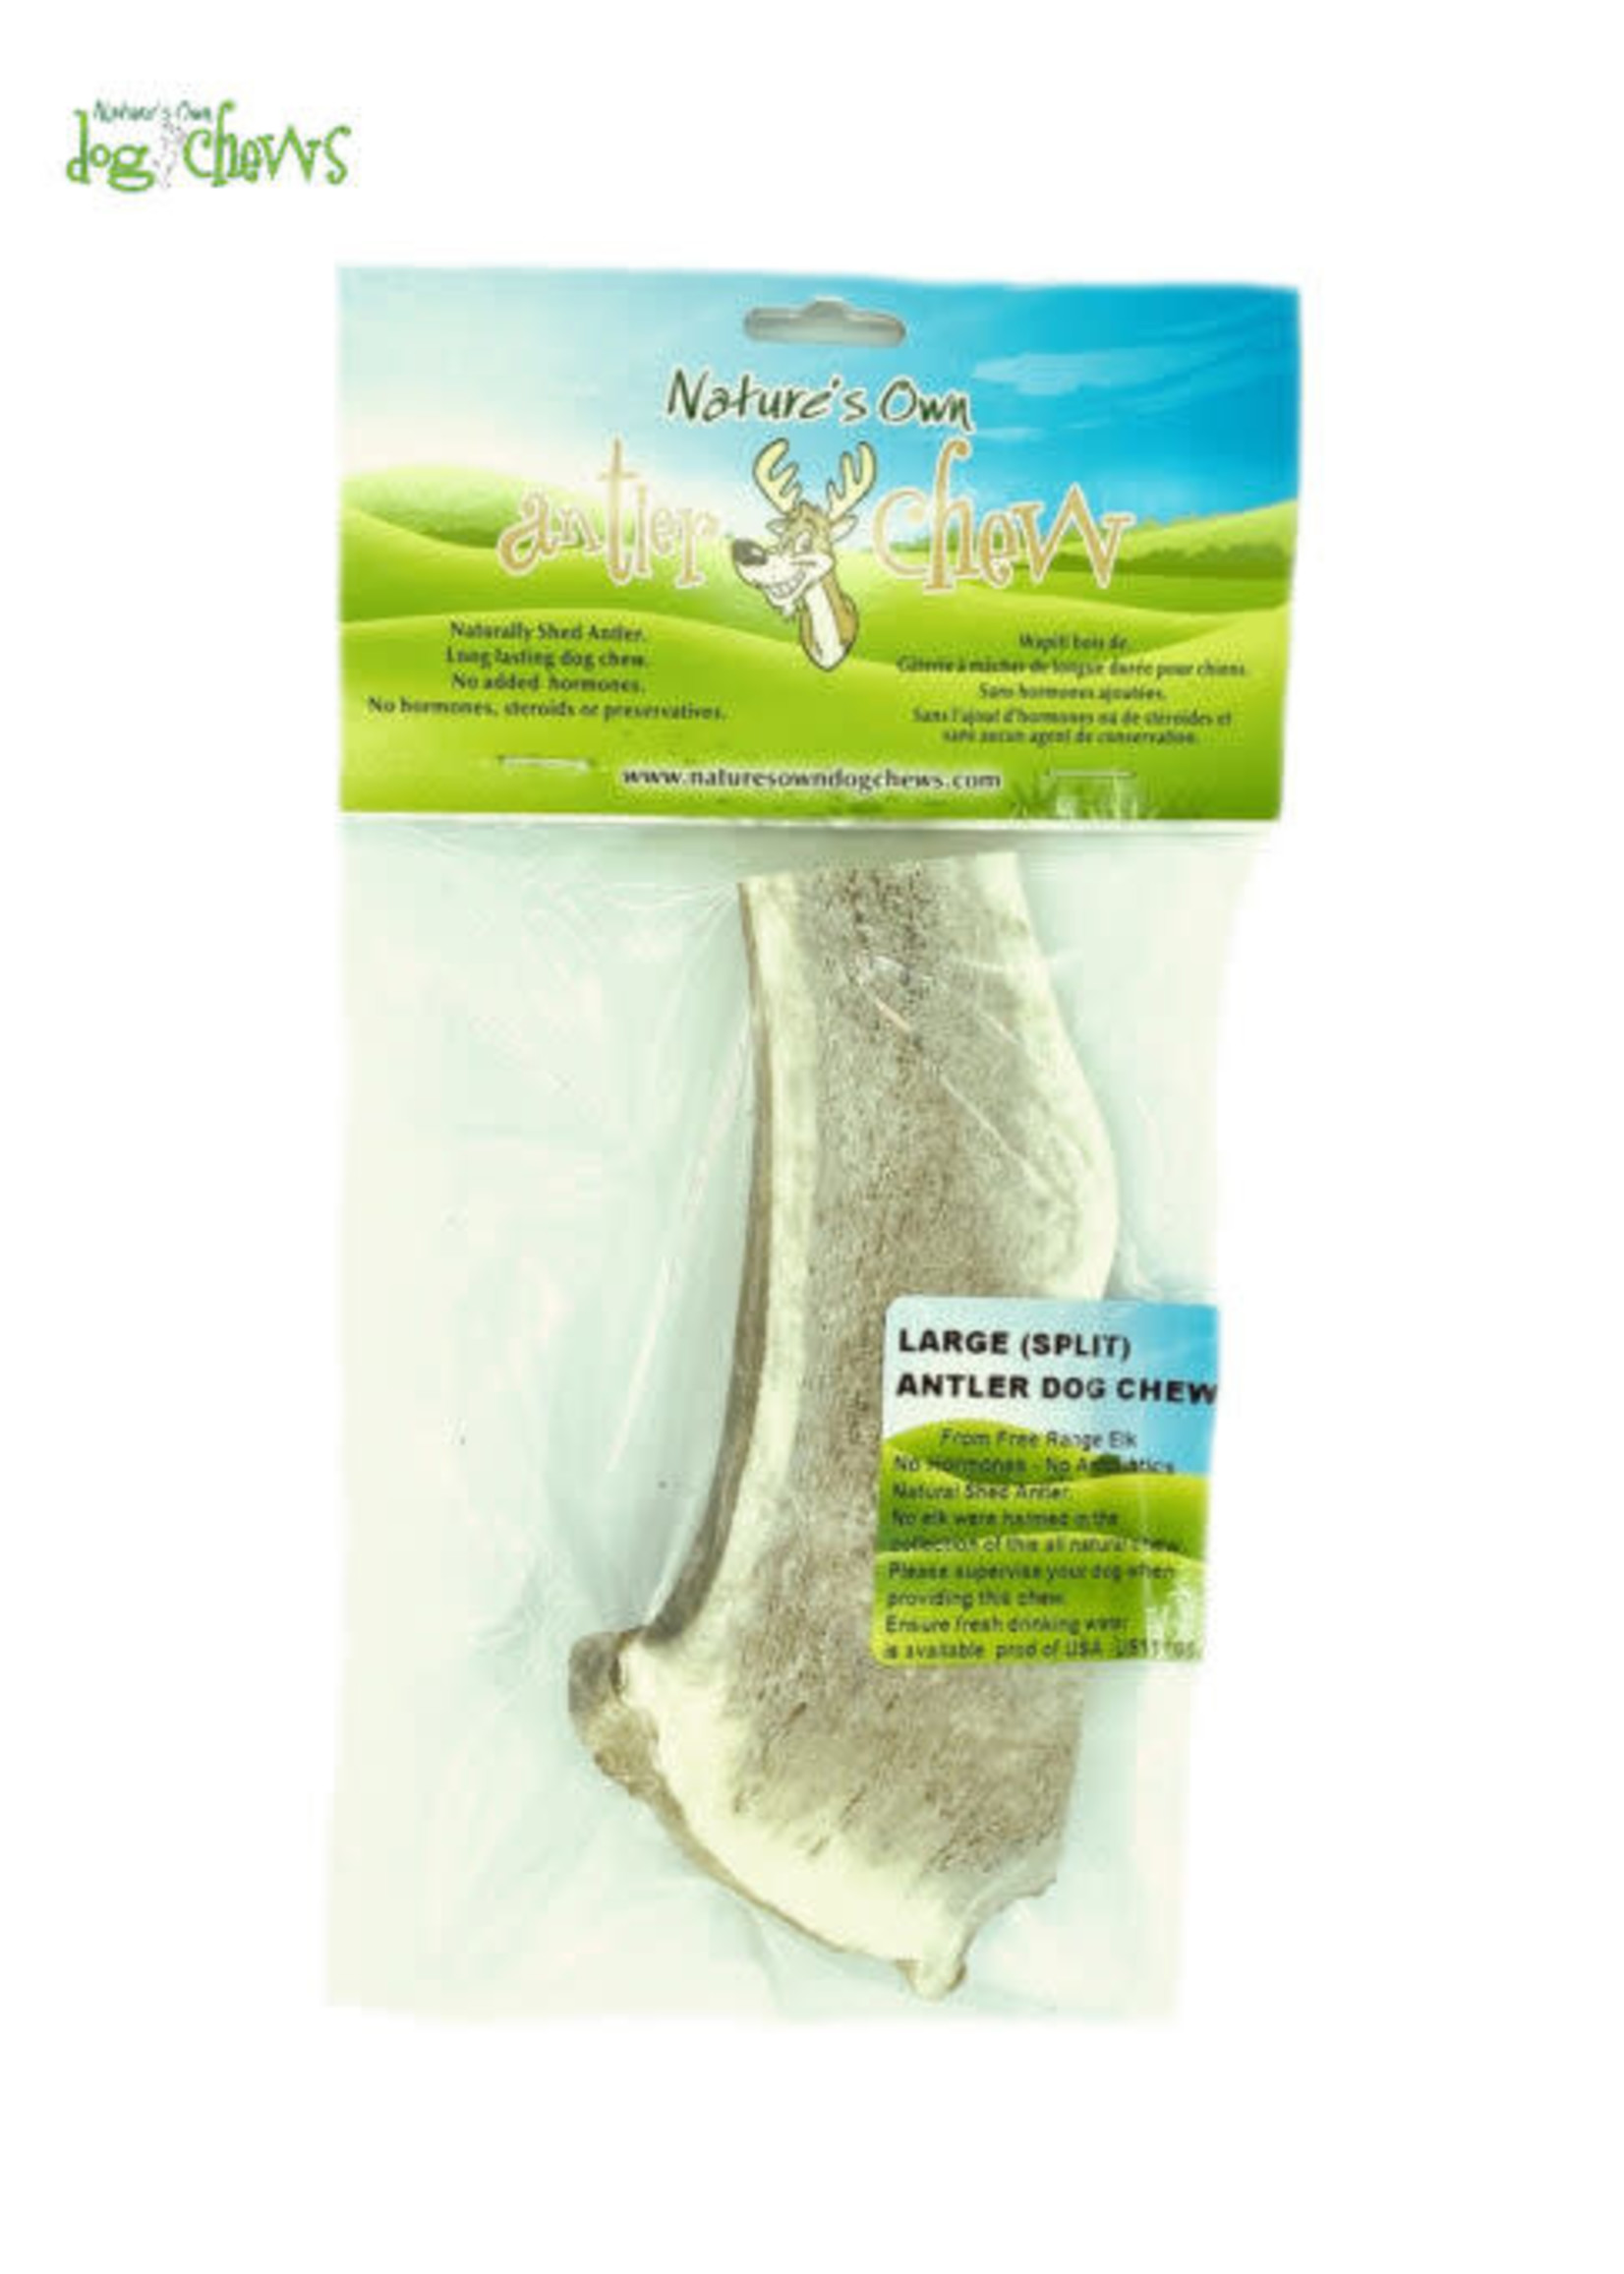 Nature's Own Nature's Own Split Antler Chew Large